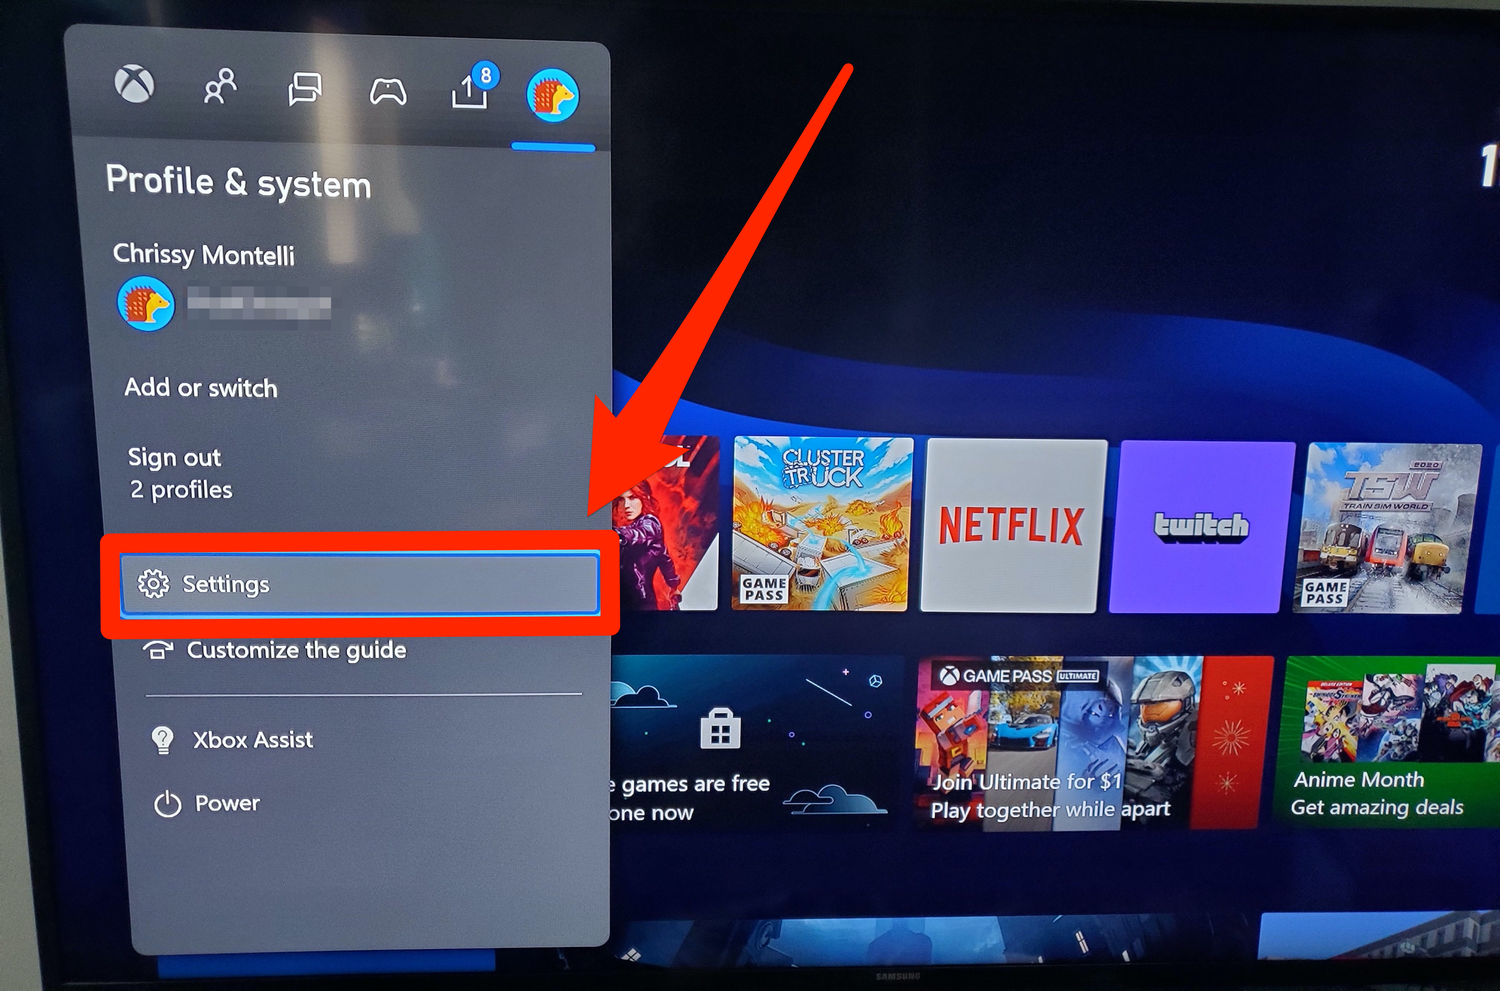 Play Xbox Games on PC: A Step-by-Step Guide